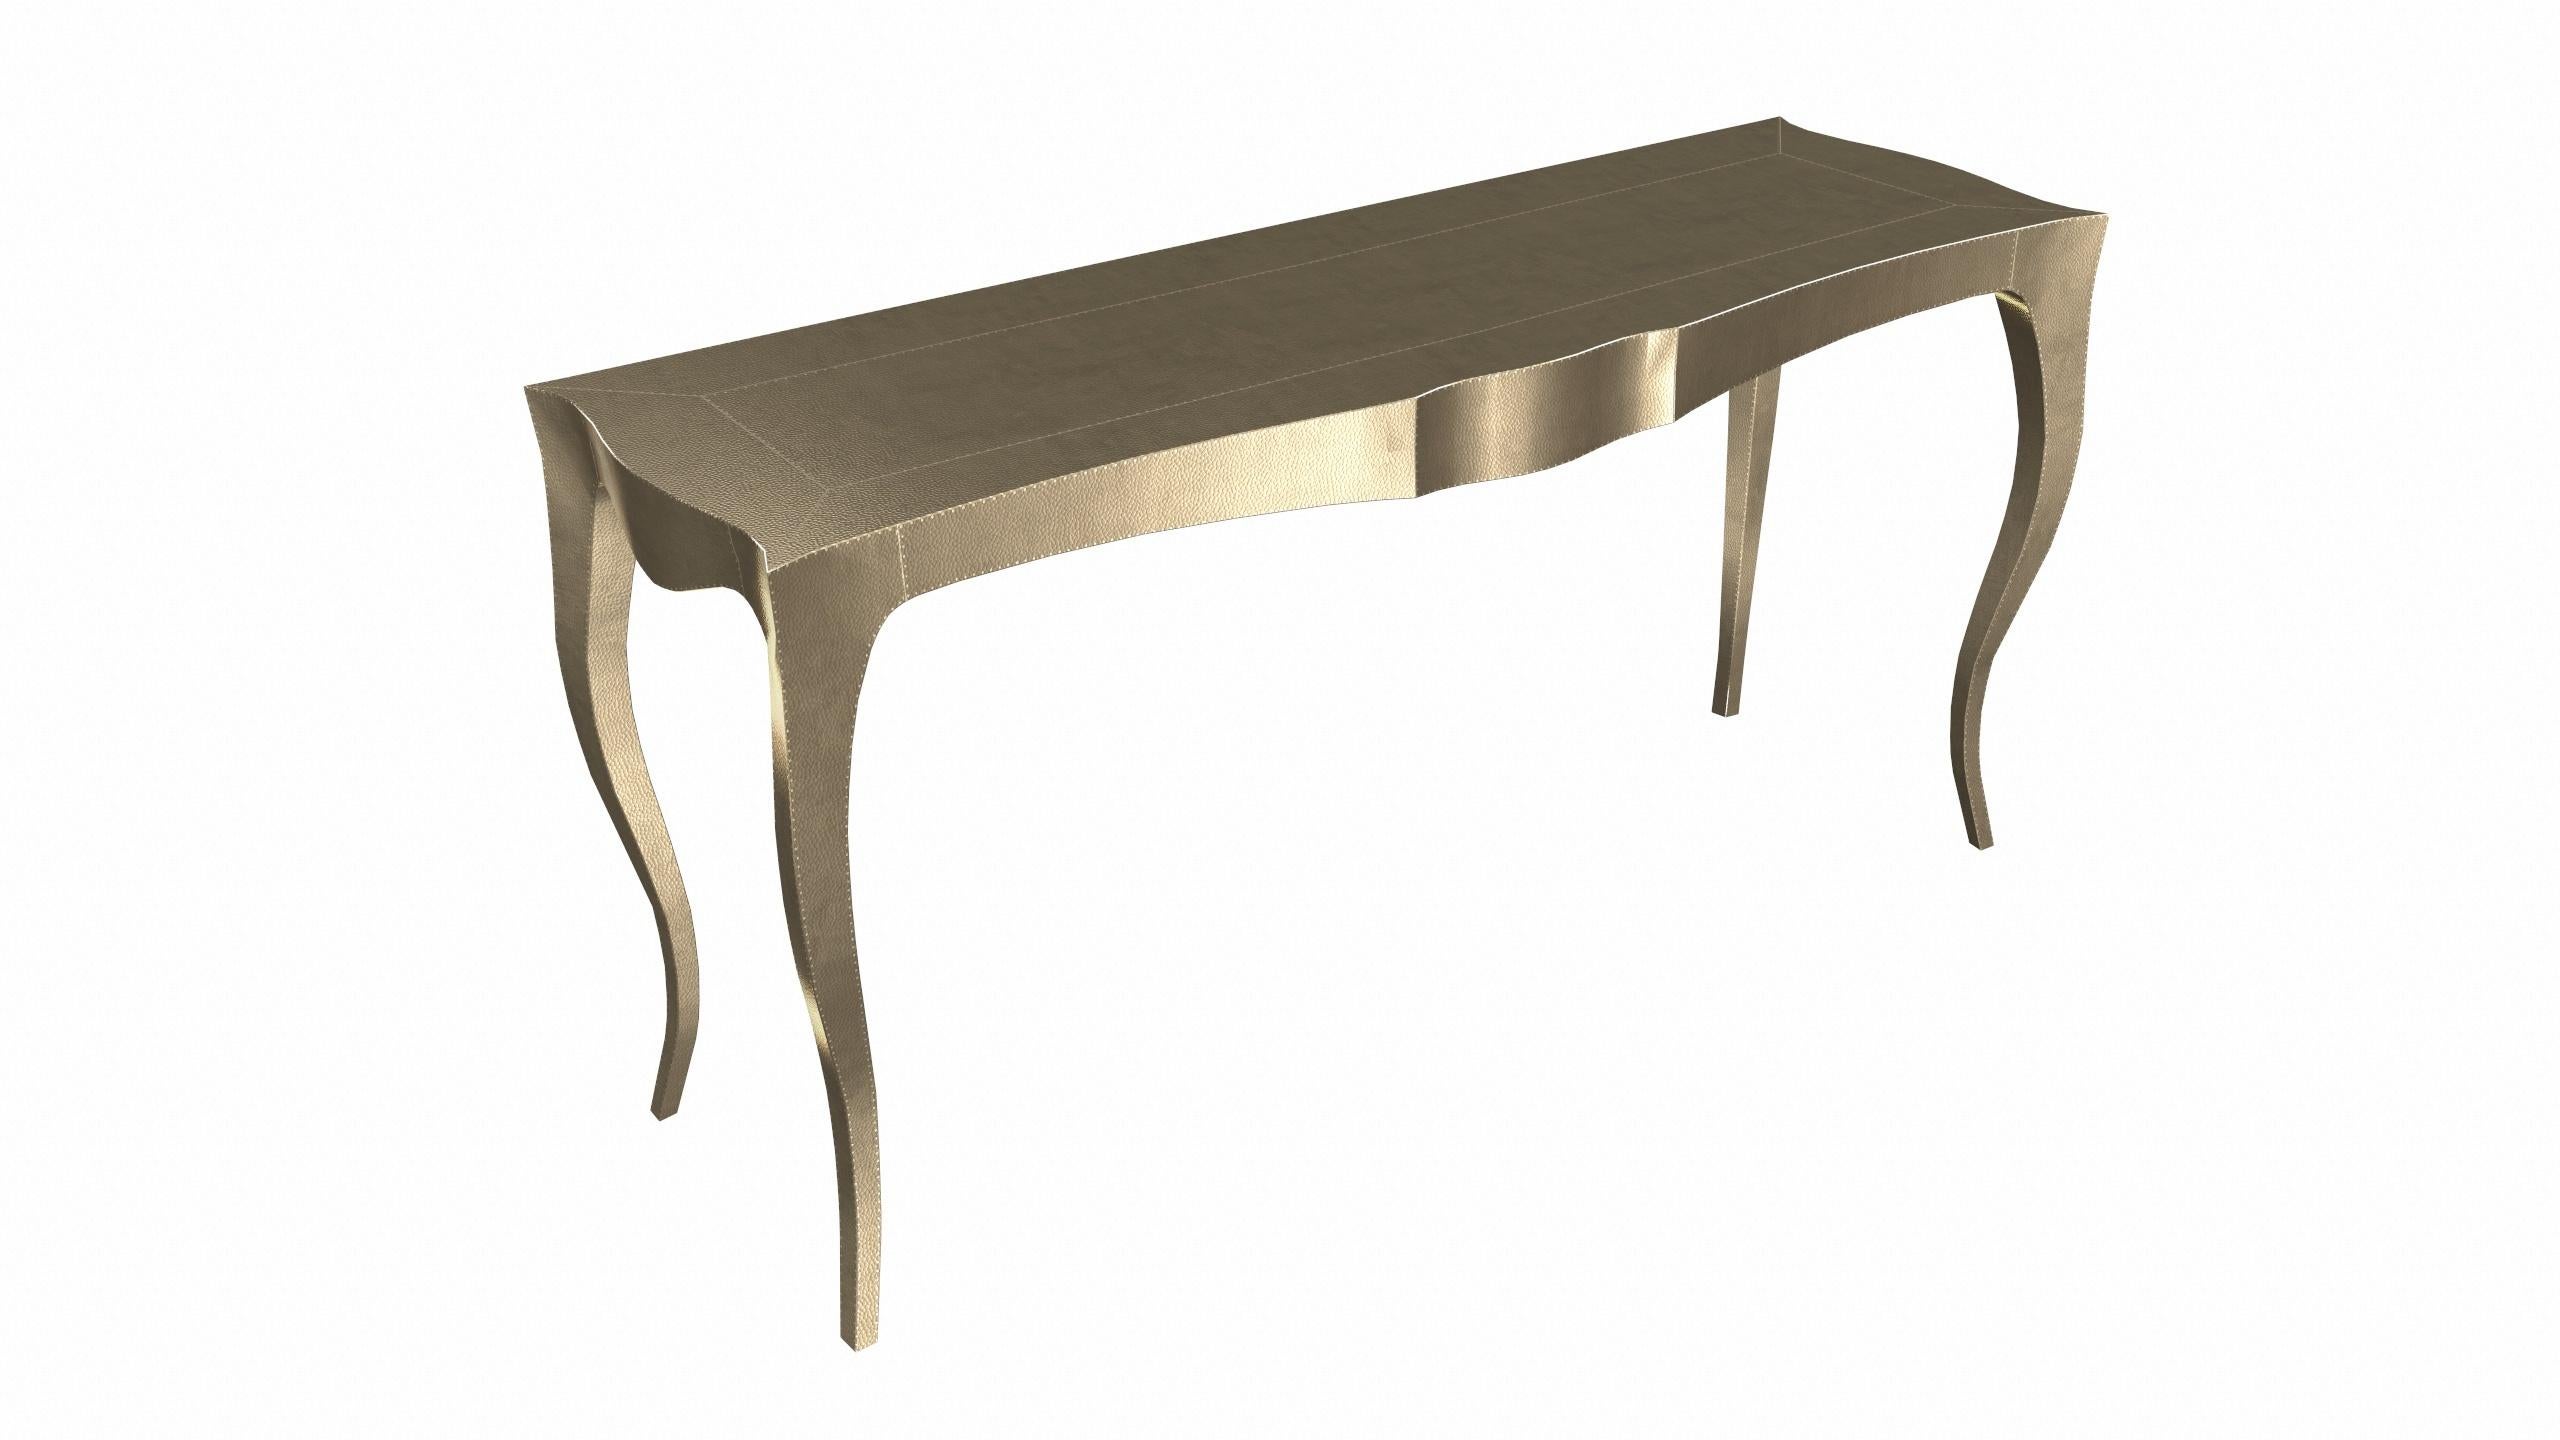 Woodwork Louise Console Art Deco Conference Tables Mid. Hammered Brass by Paul Mathieu   For Sale